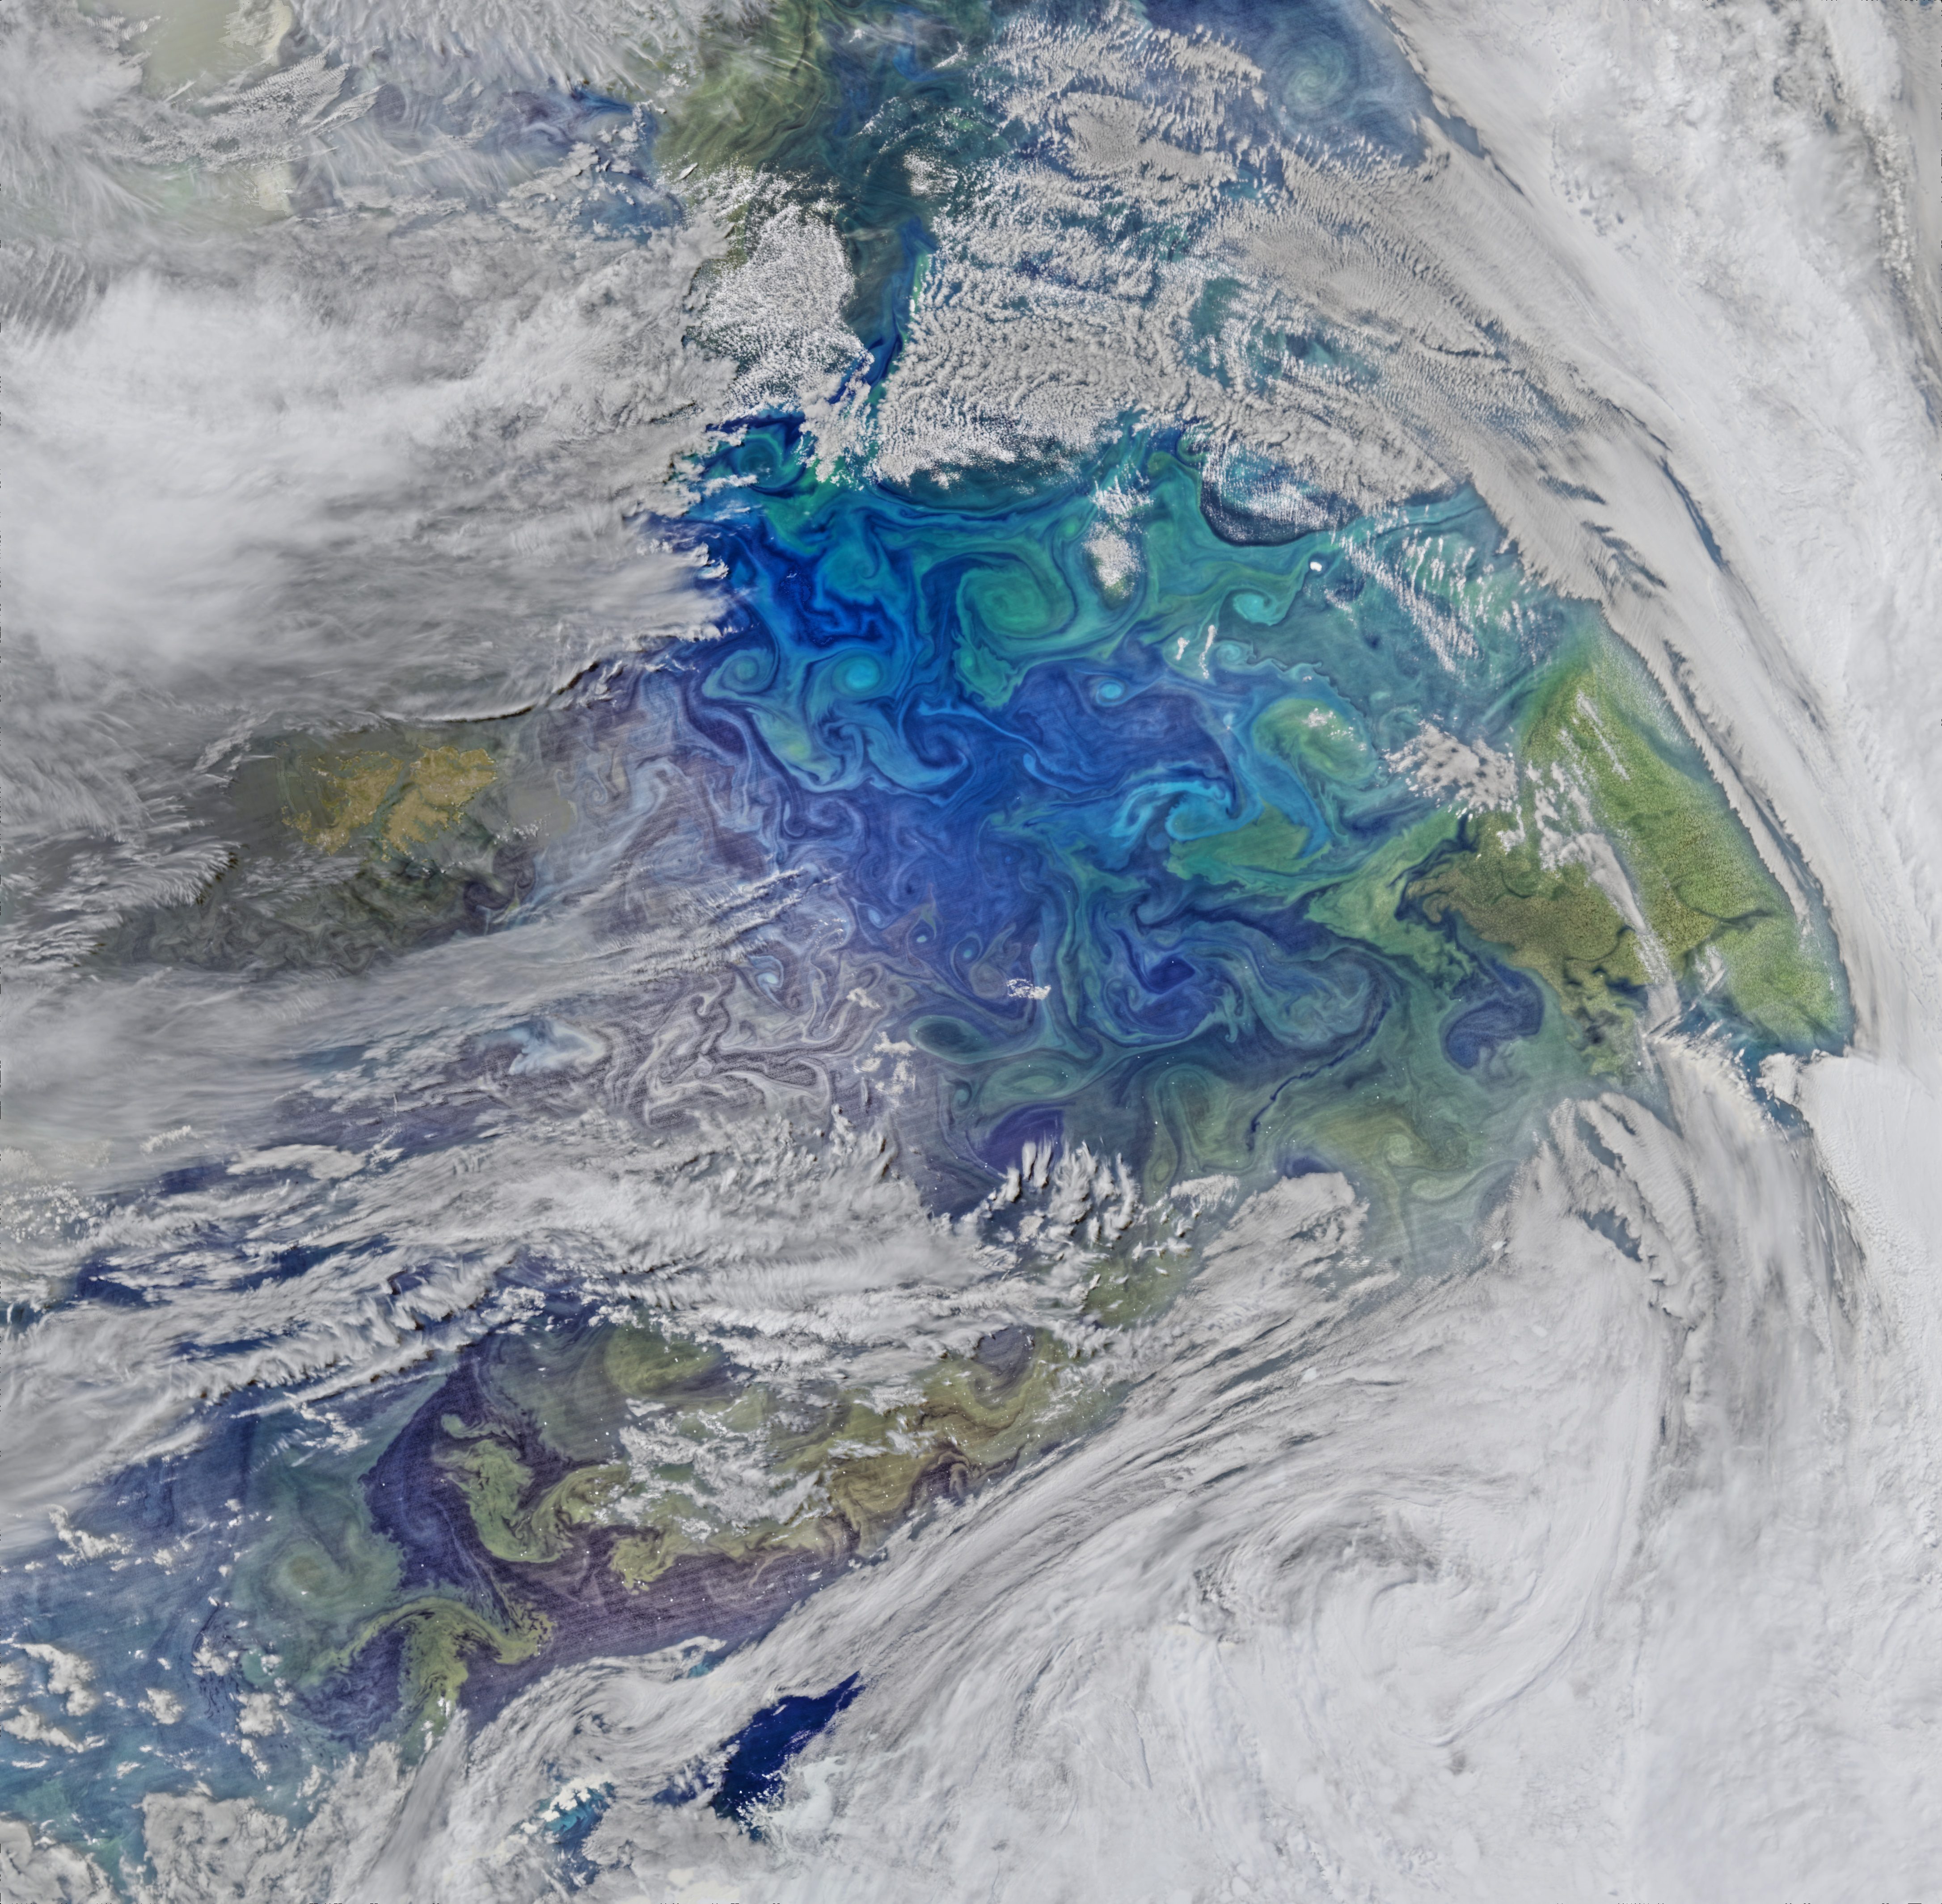 Southern Spring Sees Phytoplankton Blooms